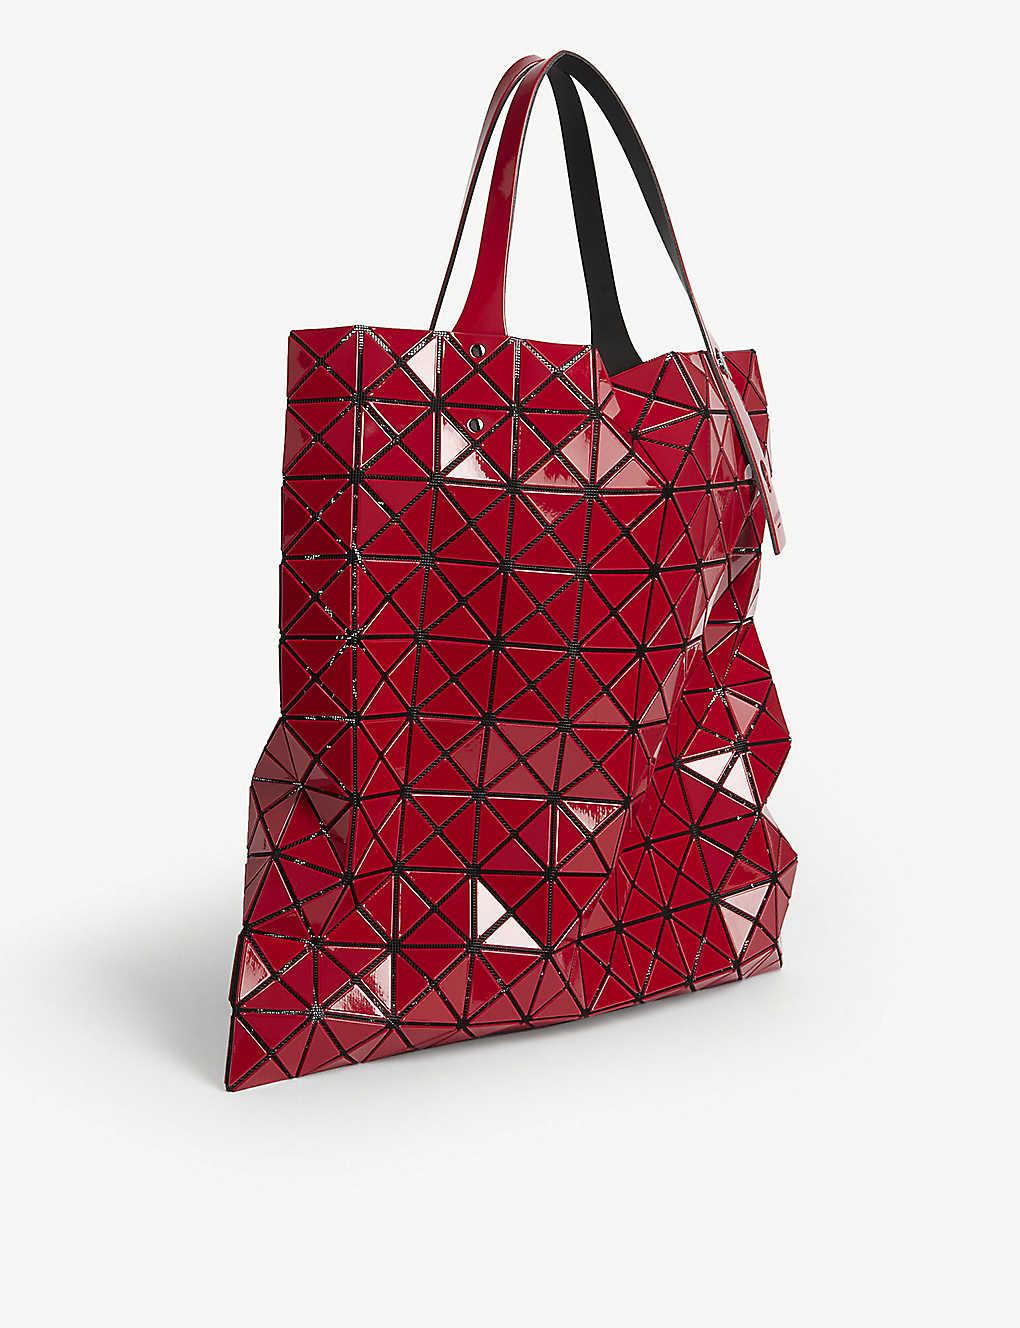 Bao Bao Issey Miyake Synthetic Prism Glossy Tote Bag in Red - Lyst